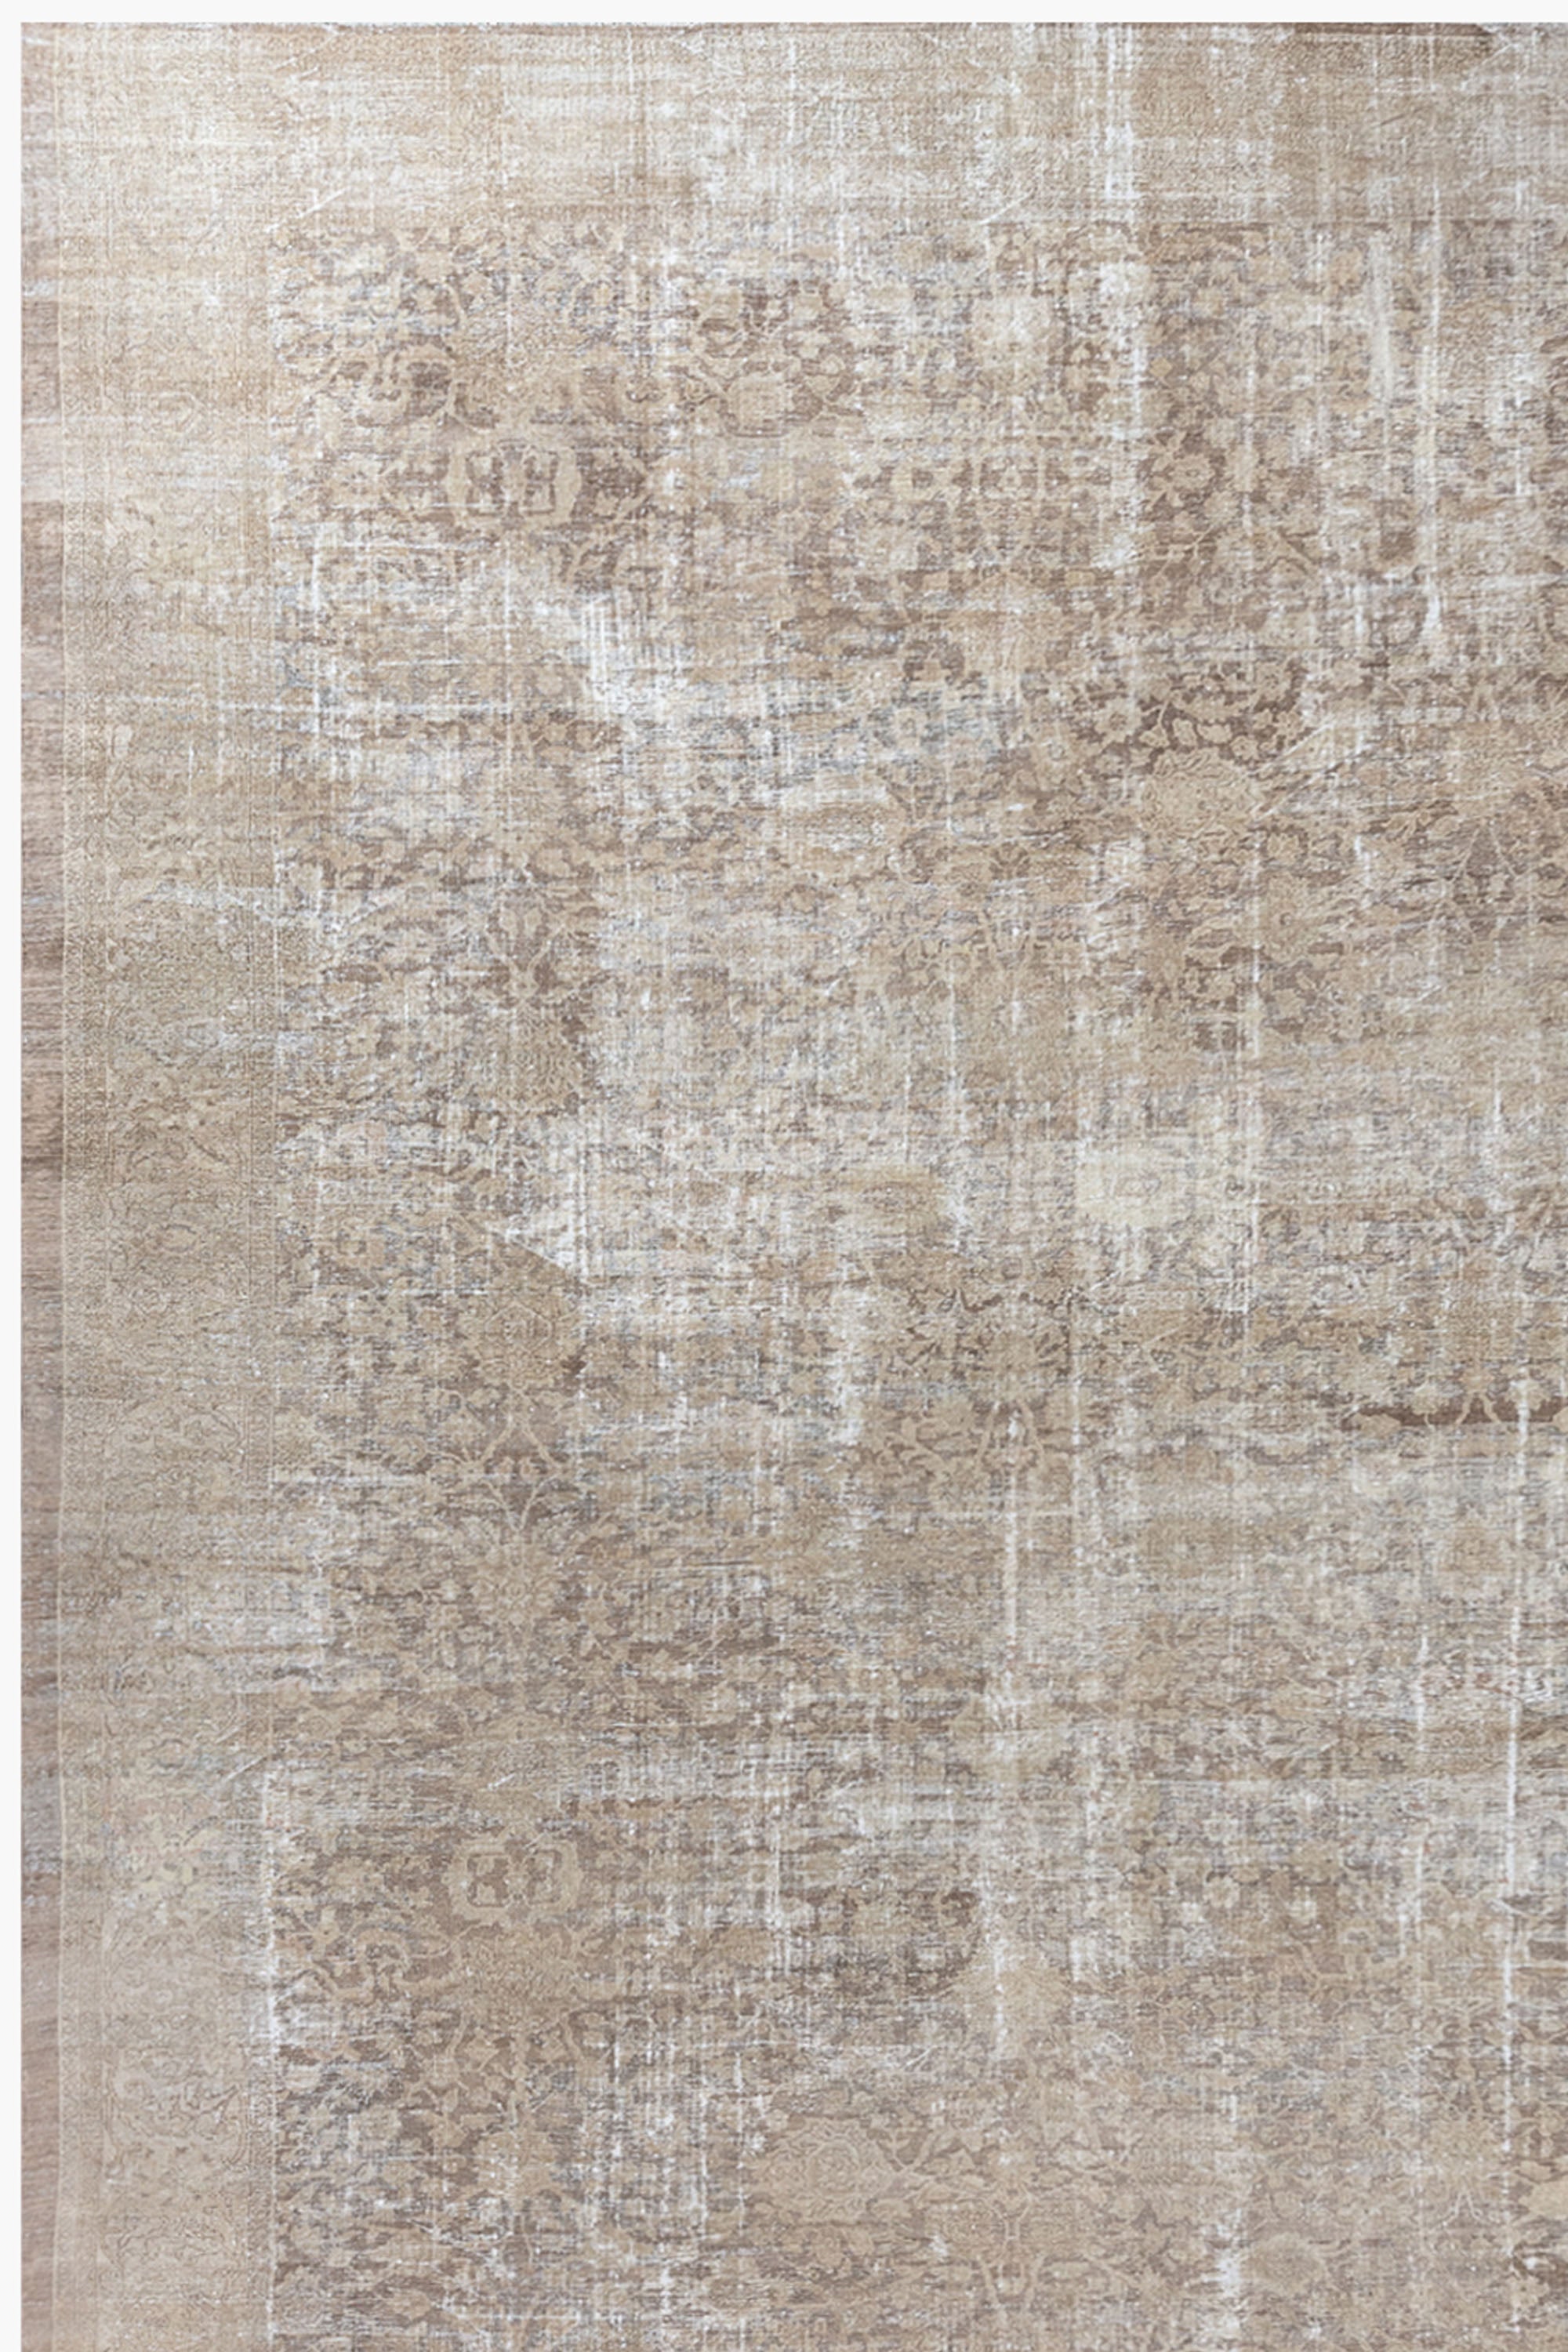 SULTANABAD RUG, WEST PERSIA, 15'10" X 24'6" - thumbnail 2